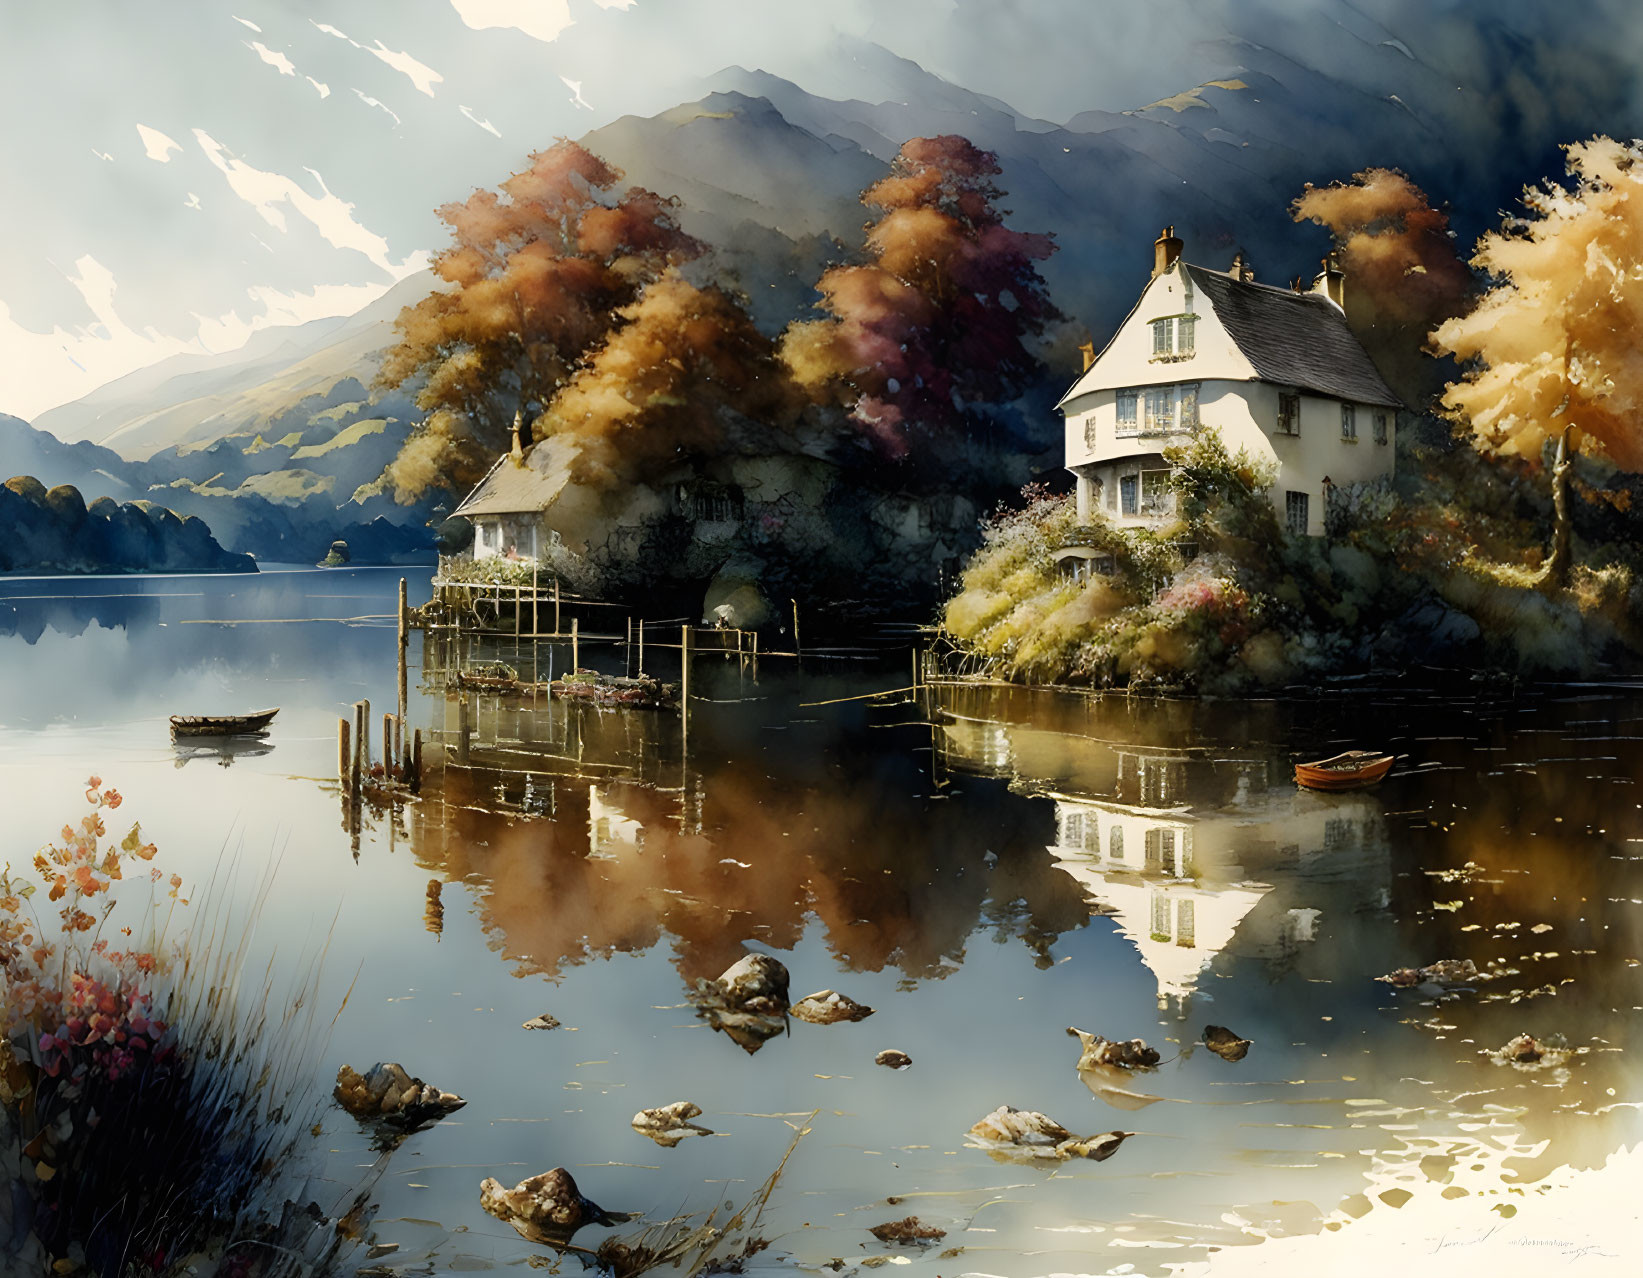 Autumnal lakeside scene with white house, boat, and mountains